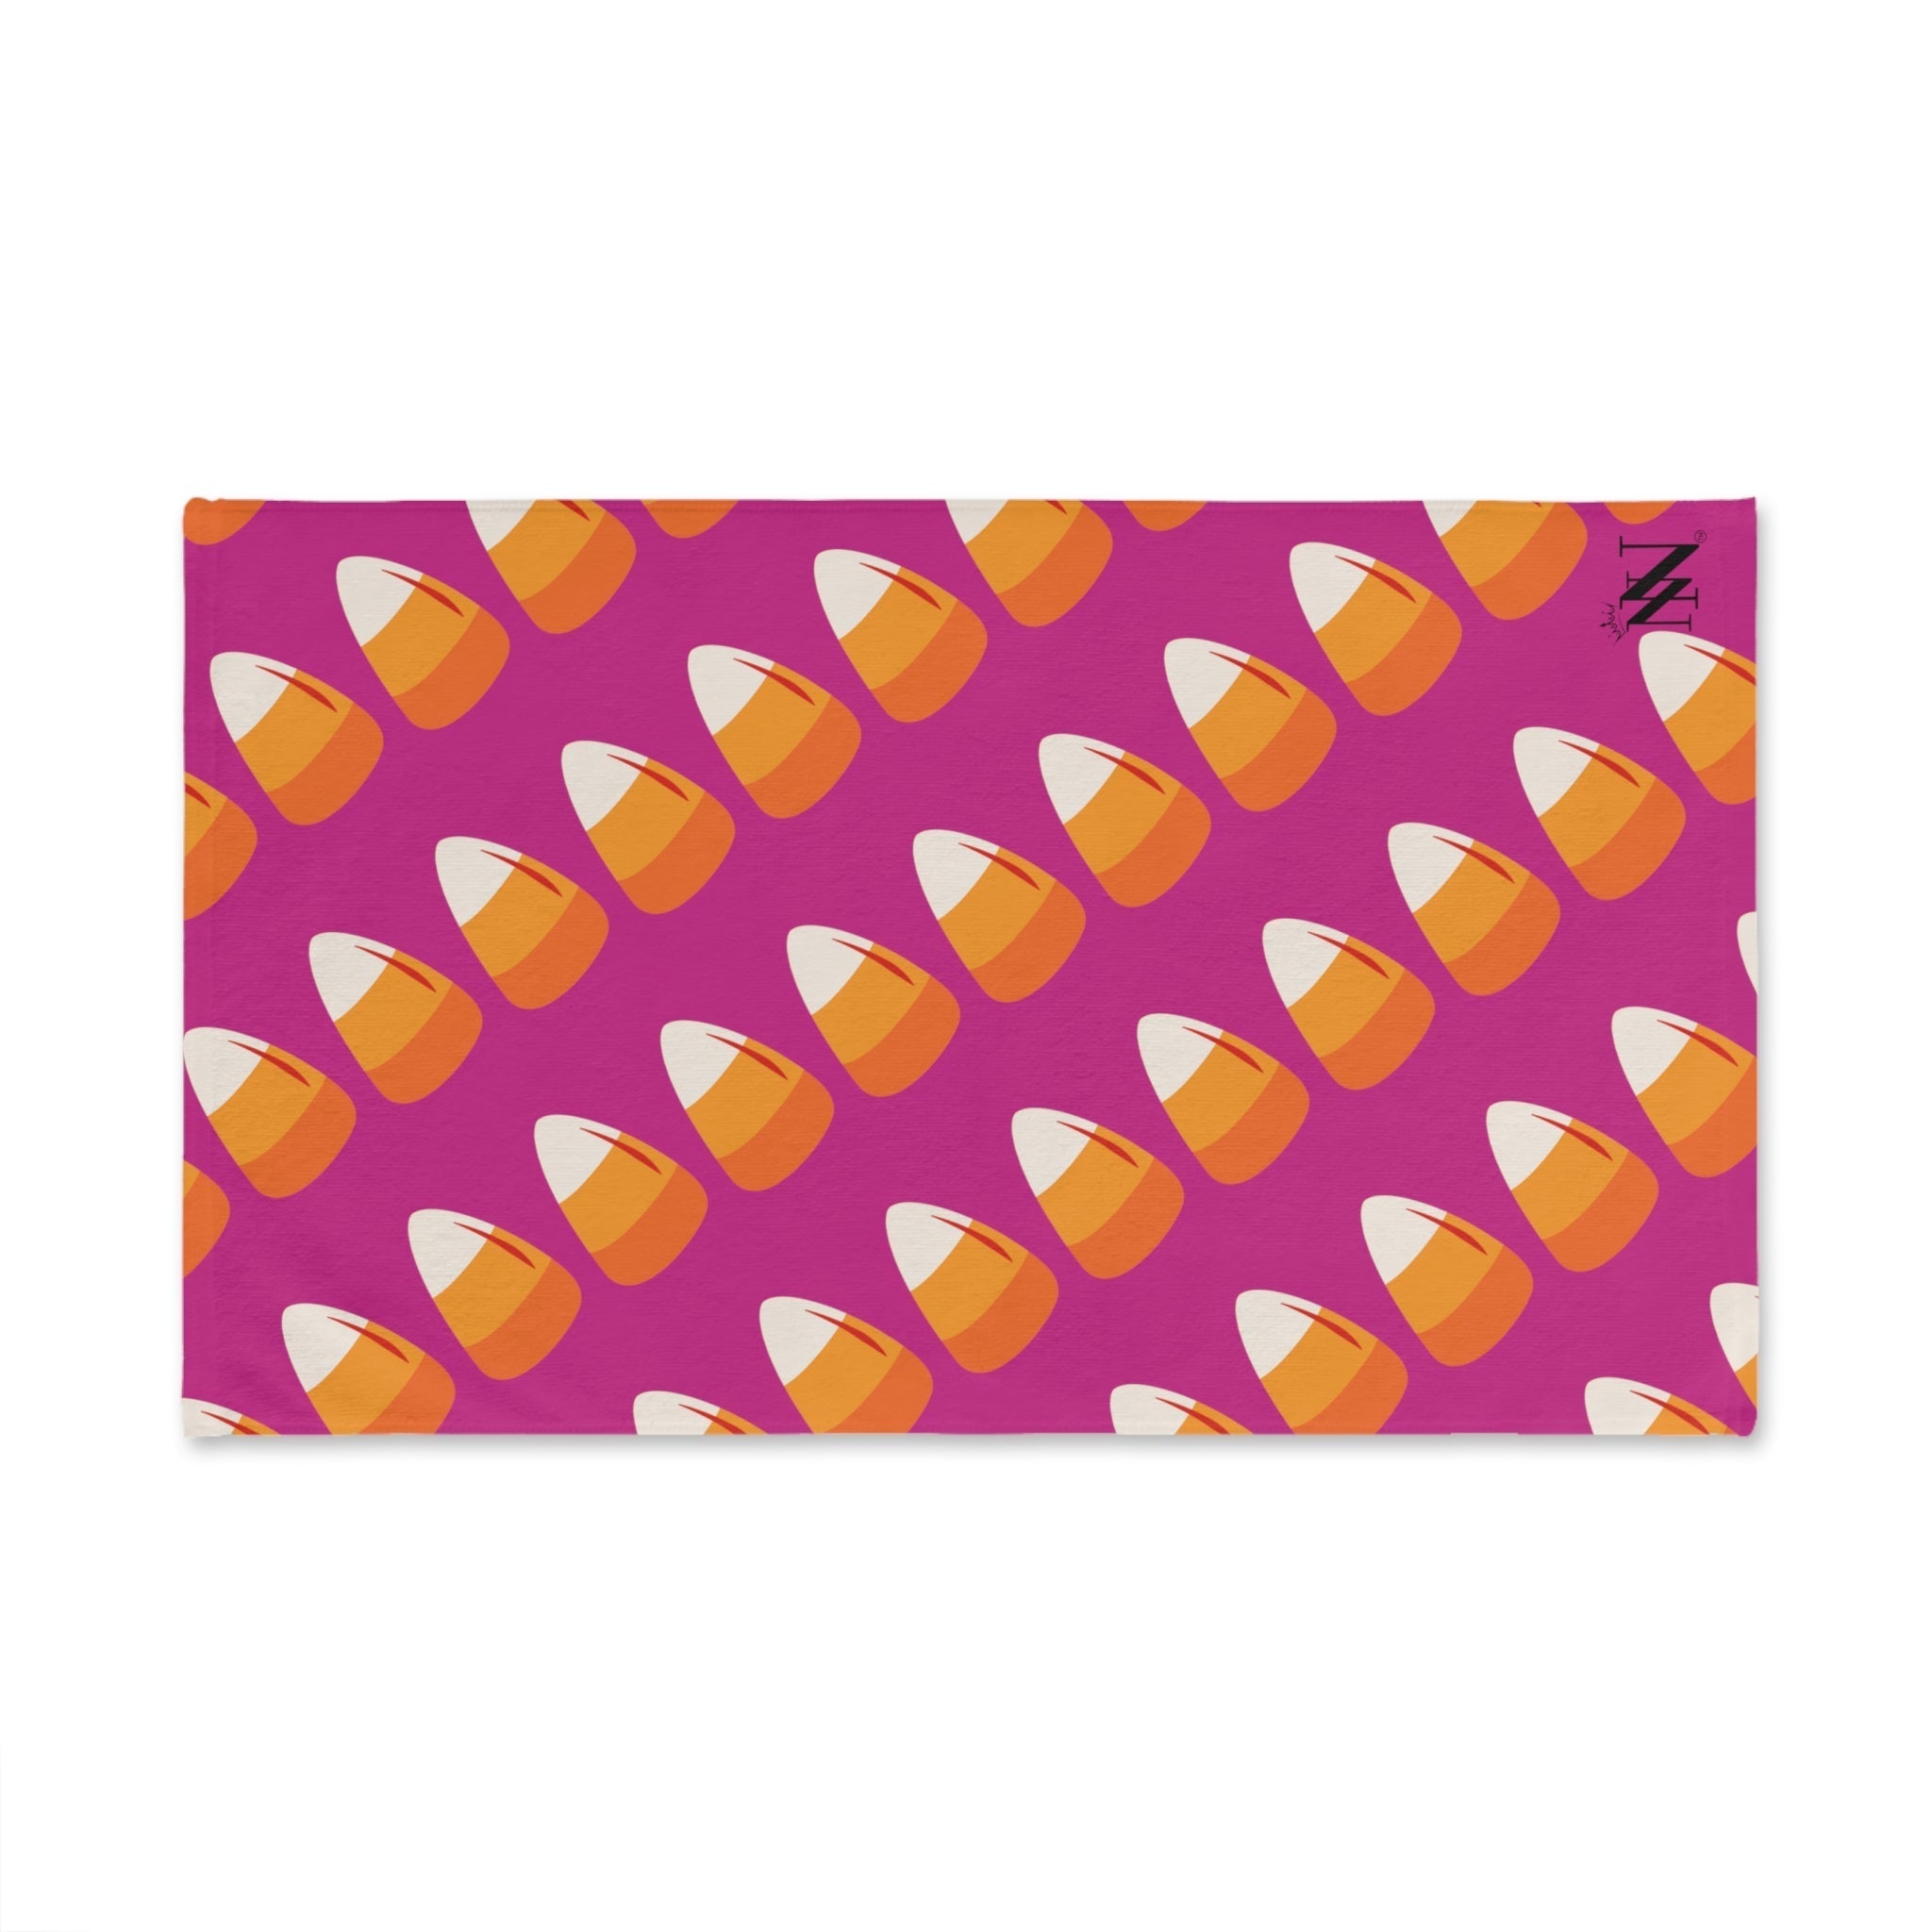 Candy Corn Fuscia | Funny Gifts for Men - Gifts for Him - Birthday Gifts for Men, Him, Husband, Boyfriend, New Couple Gifts, Fathers & Valentines Day Gifts, Hand Towels NECTAR NAPKINS